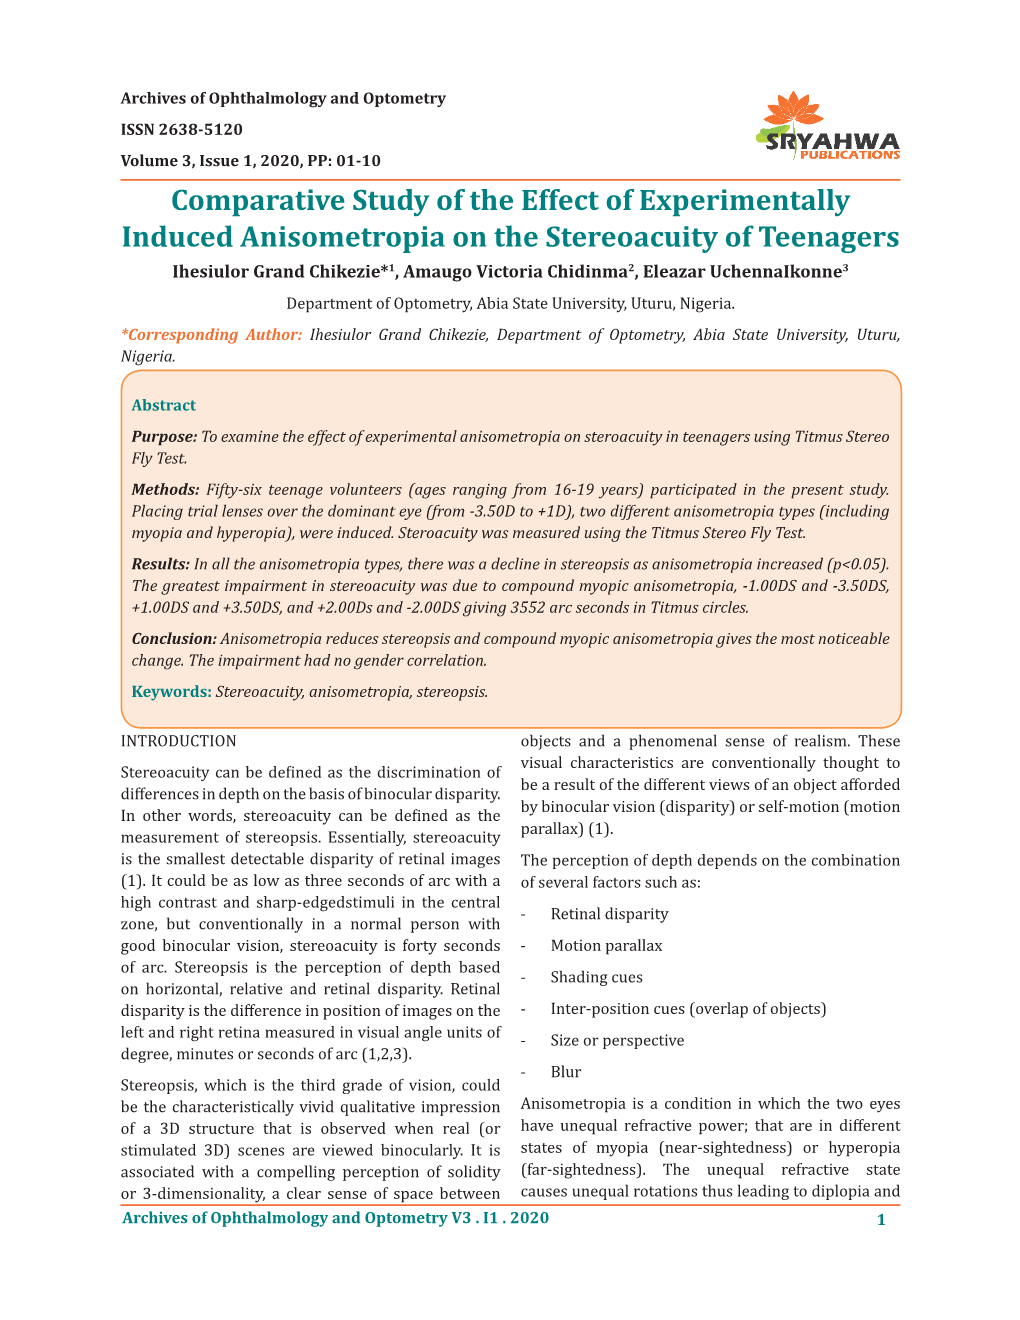 Comparative Study of the Effect of Experimentally Induced